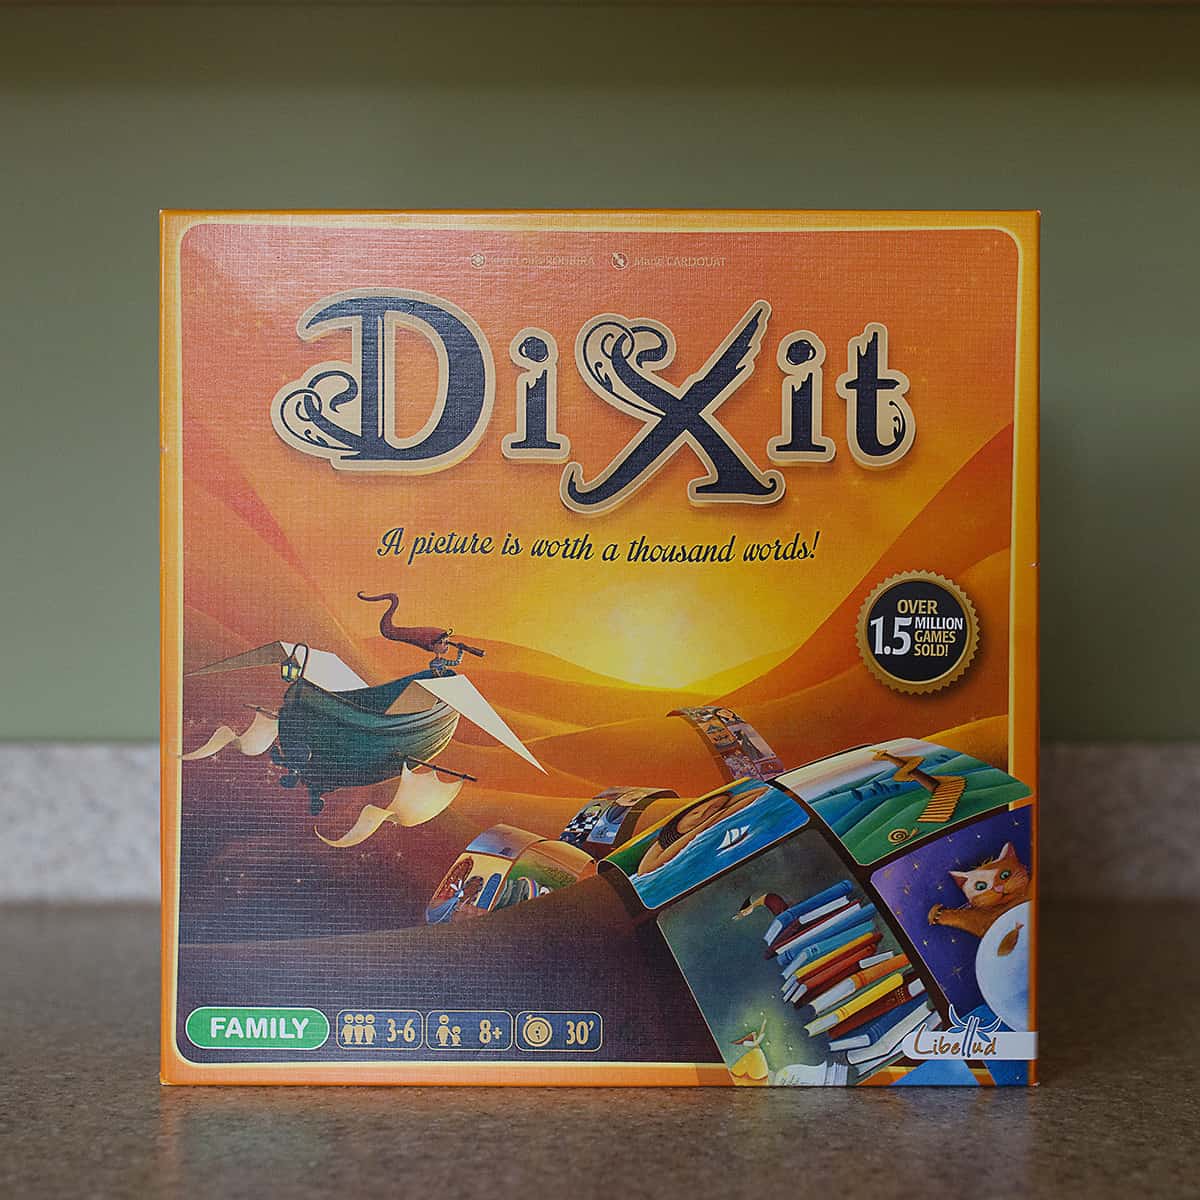 New Dixit Family Board Game Libellud Authentic Picture Is Worth A Thousand Words 